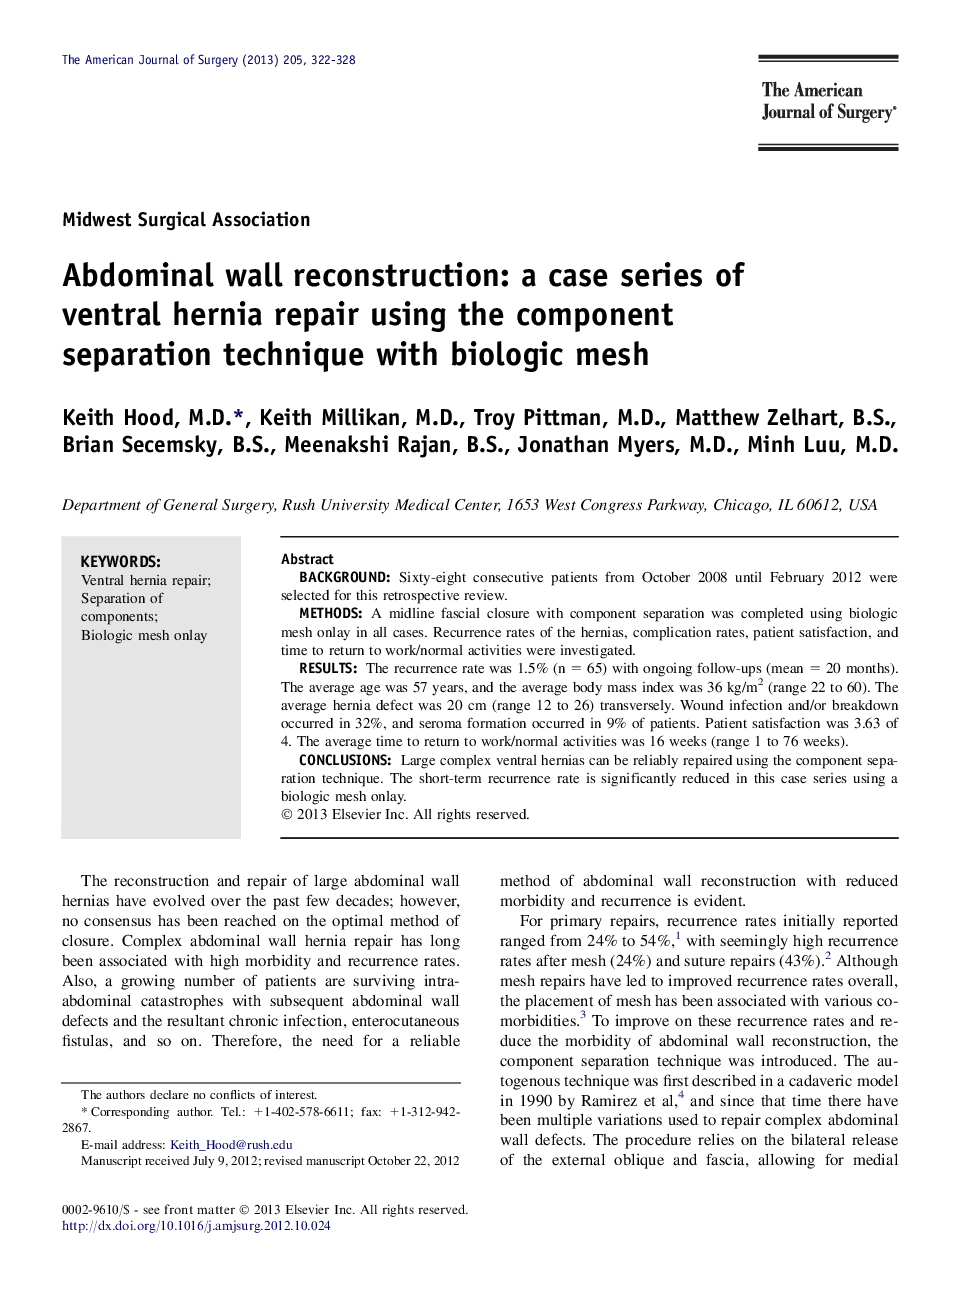 Abdominal wall reconstruction: a case series of ventral hernia repair using the component separation technique with biologic mesh 